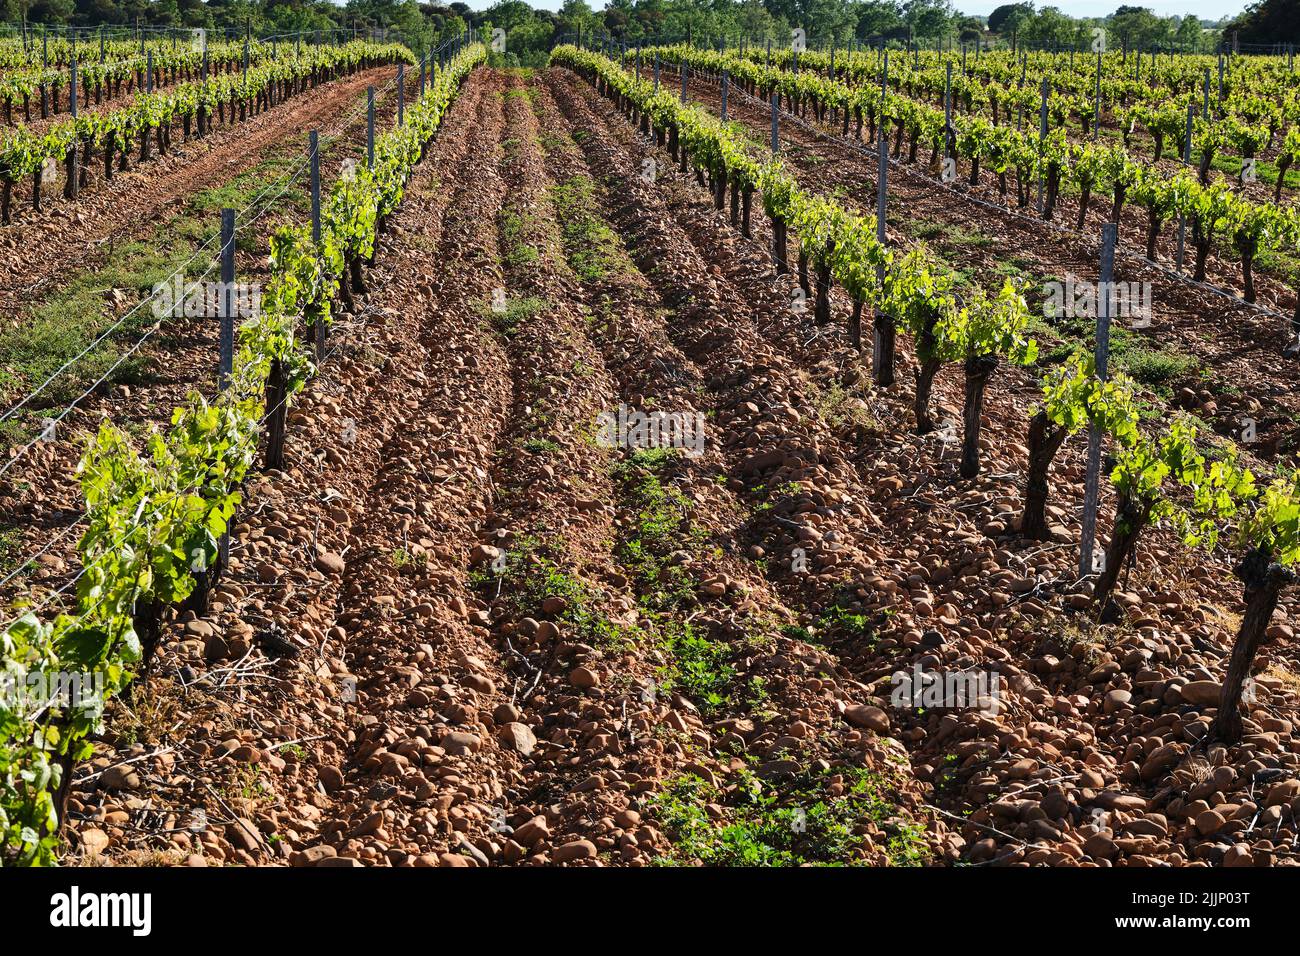 Picturesque scenery of rows of lush grapevines growing in vineyard on sunny day in countryside Stock Photo